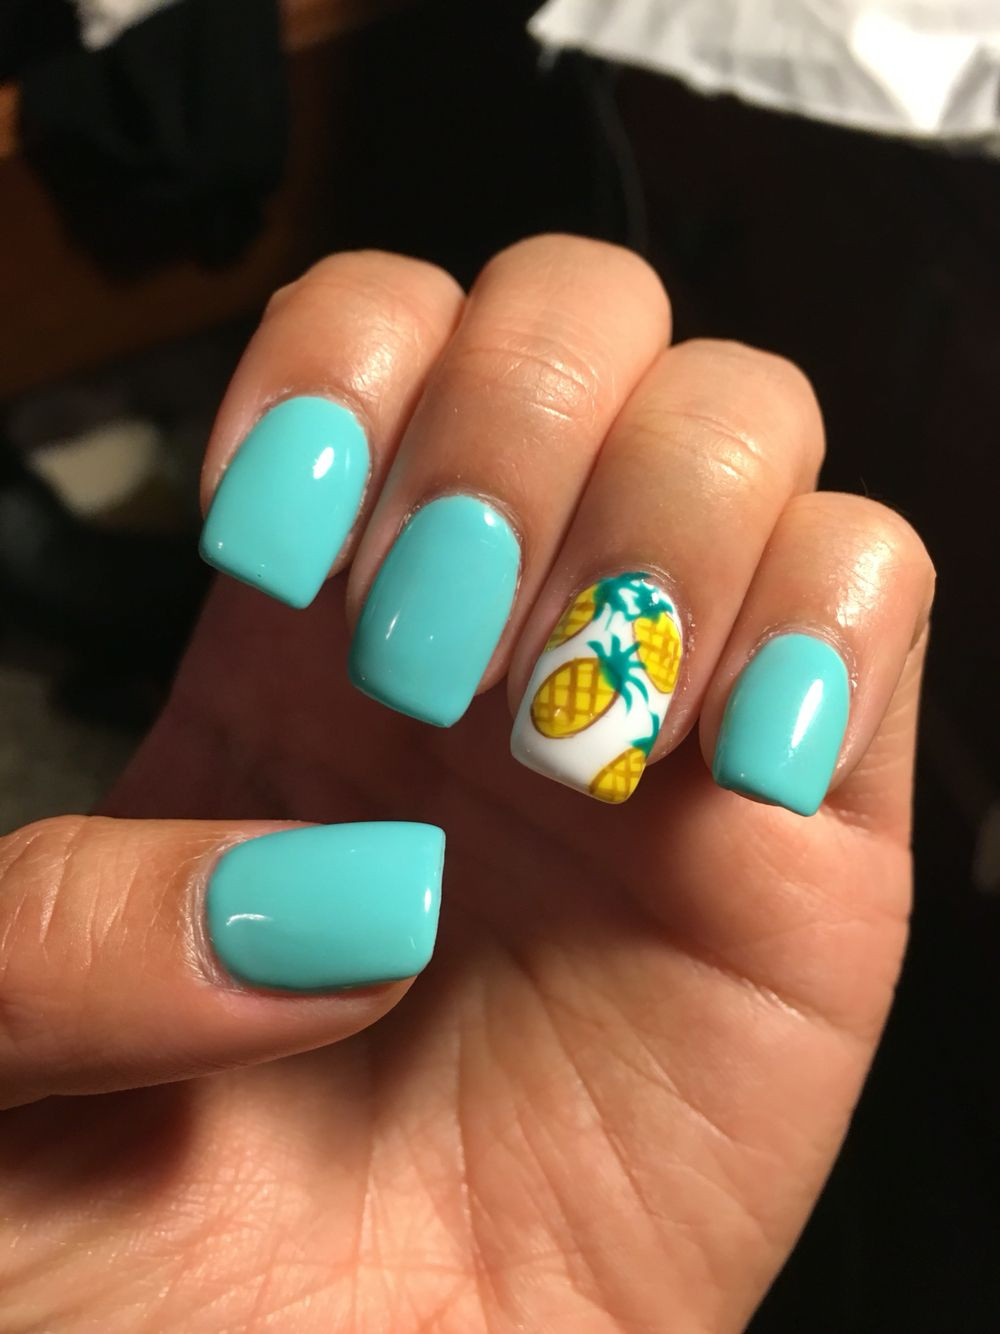 Cute Fake Nail Ideas
 Summer nails Teal acrylics with pineapples